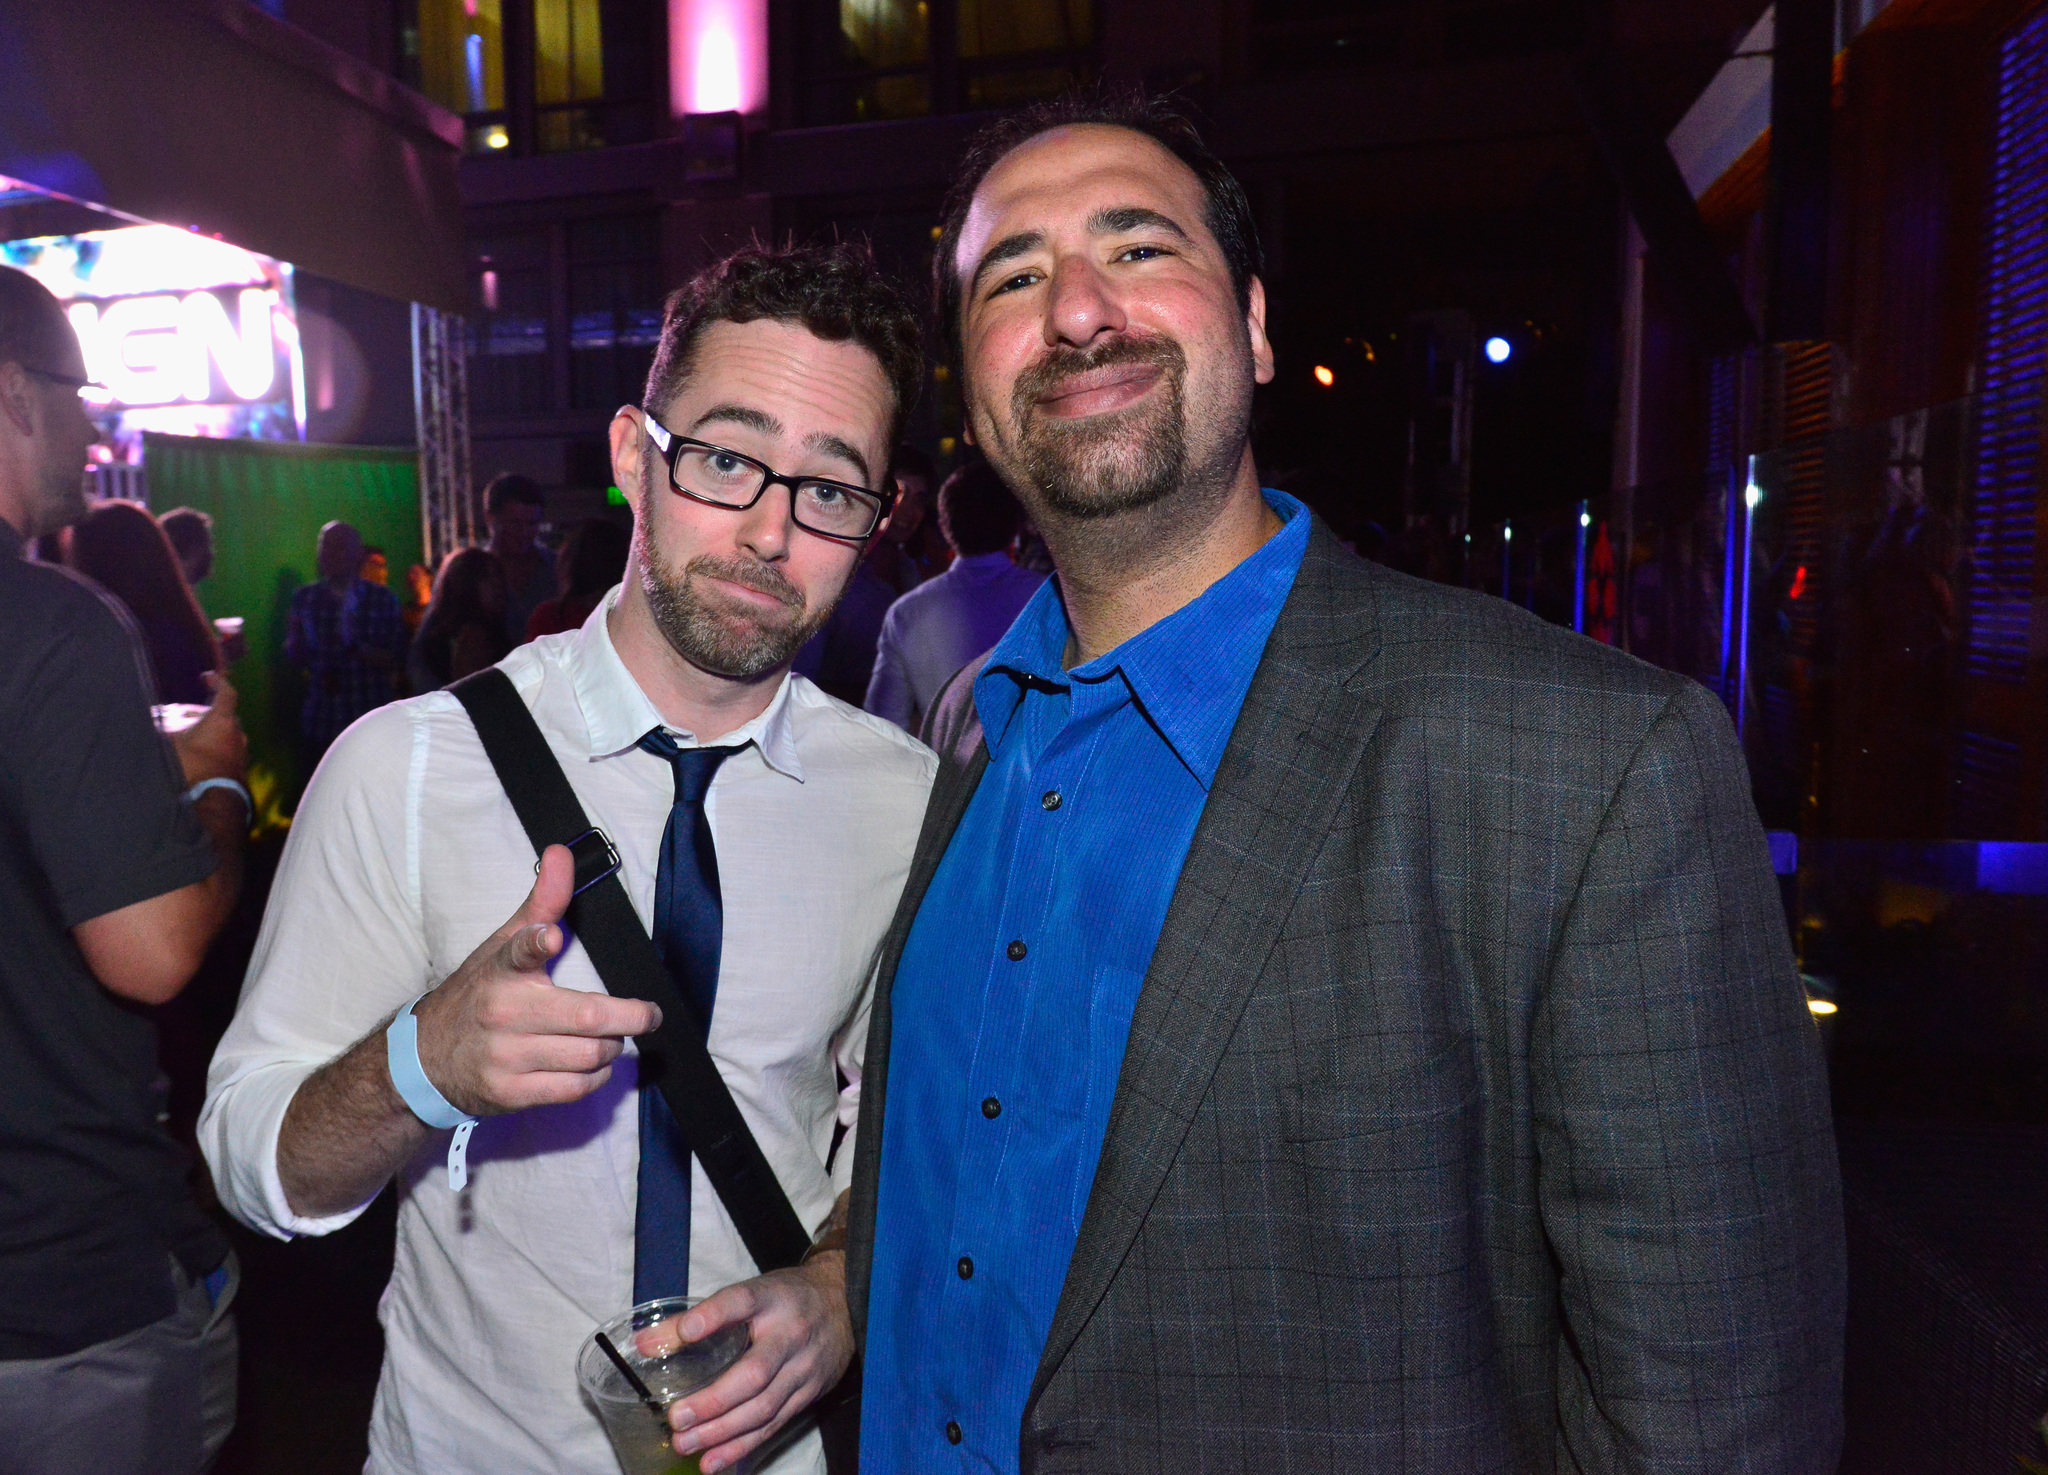 Jason Kaplan and Steve Brandano at event of The World's End (2013)